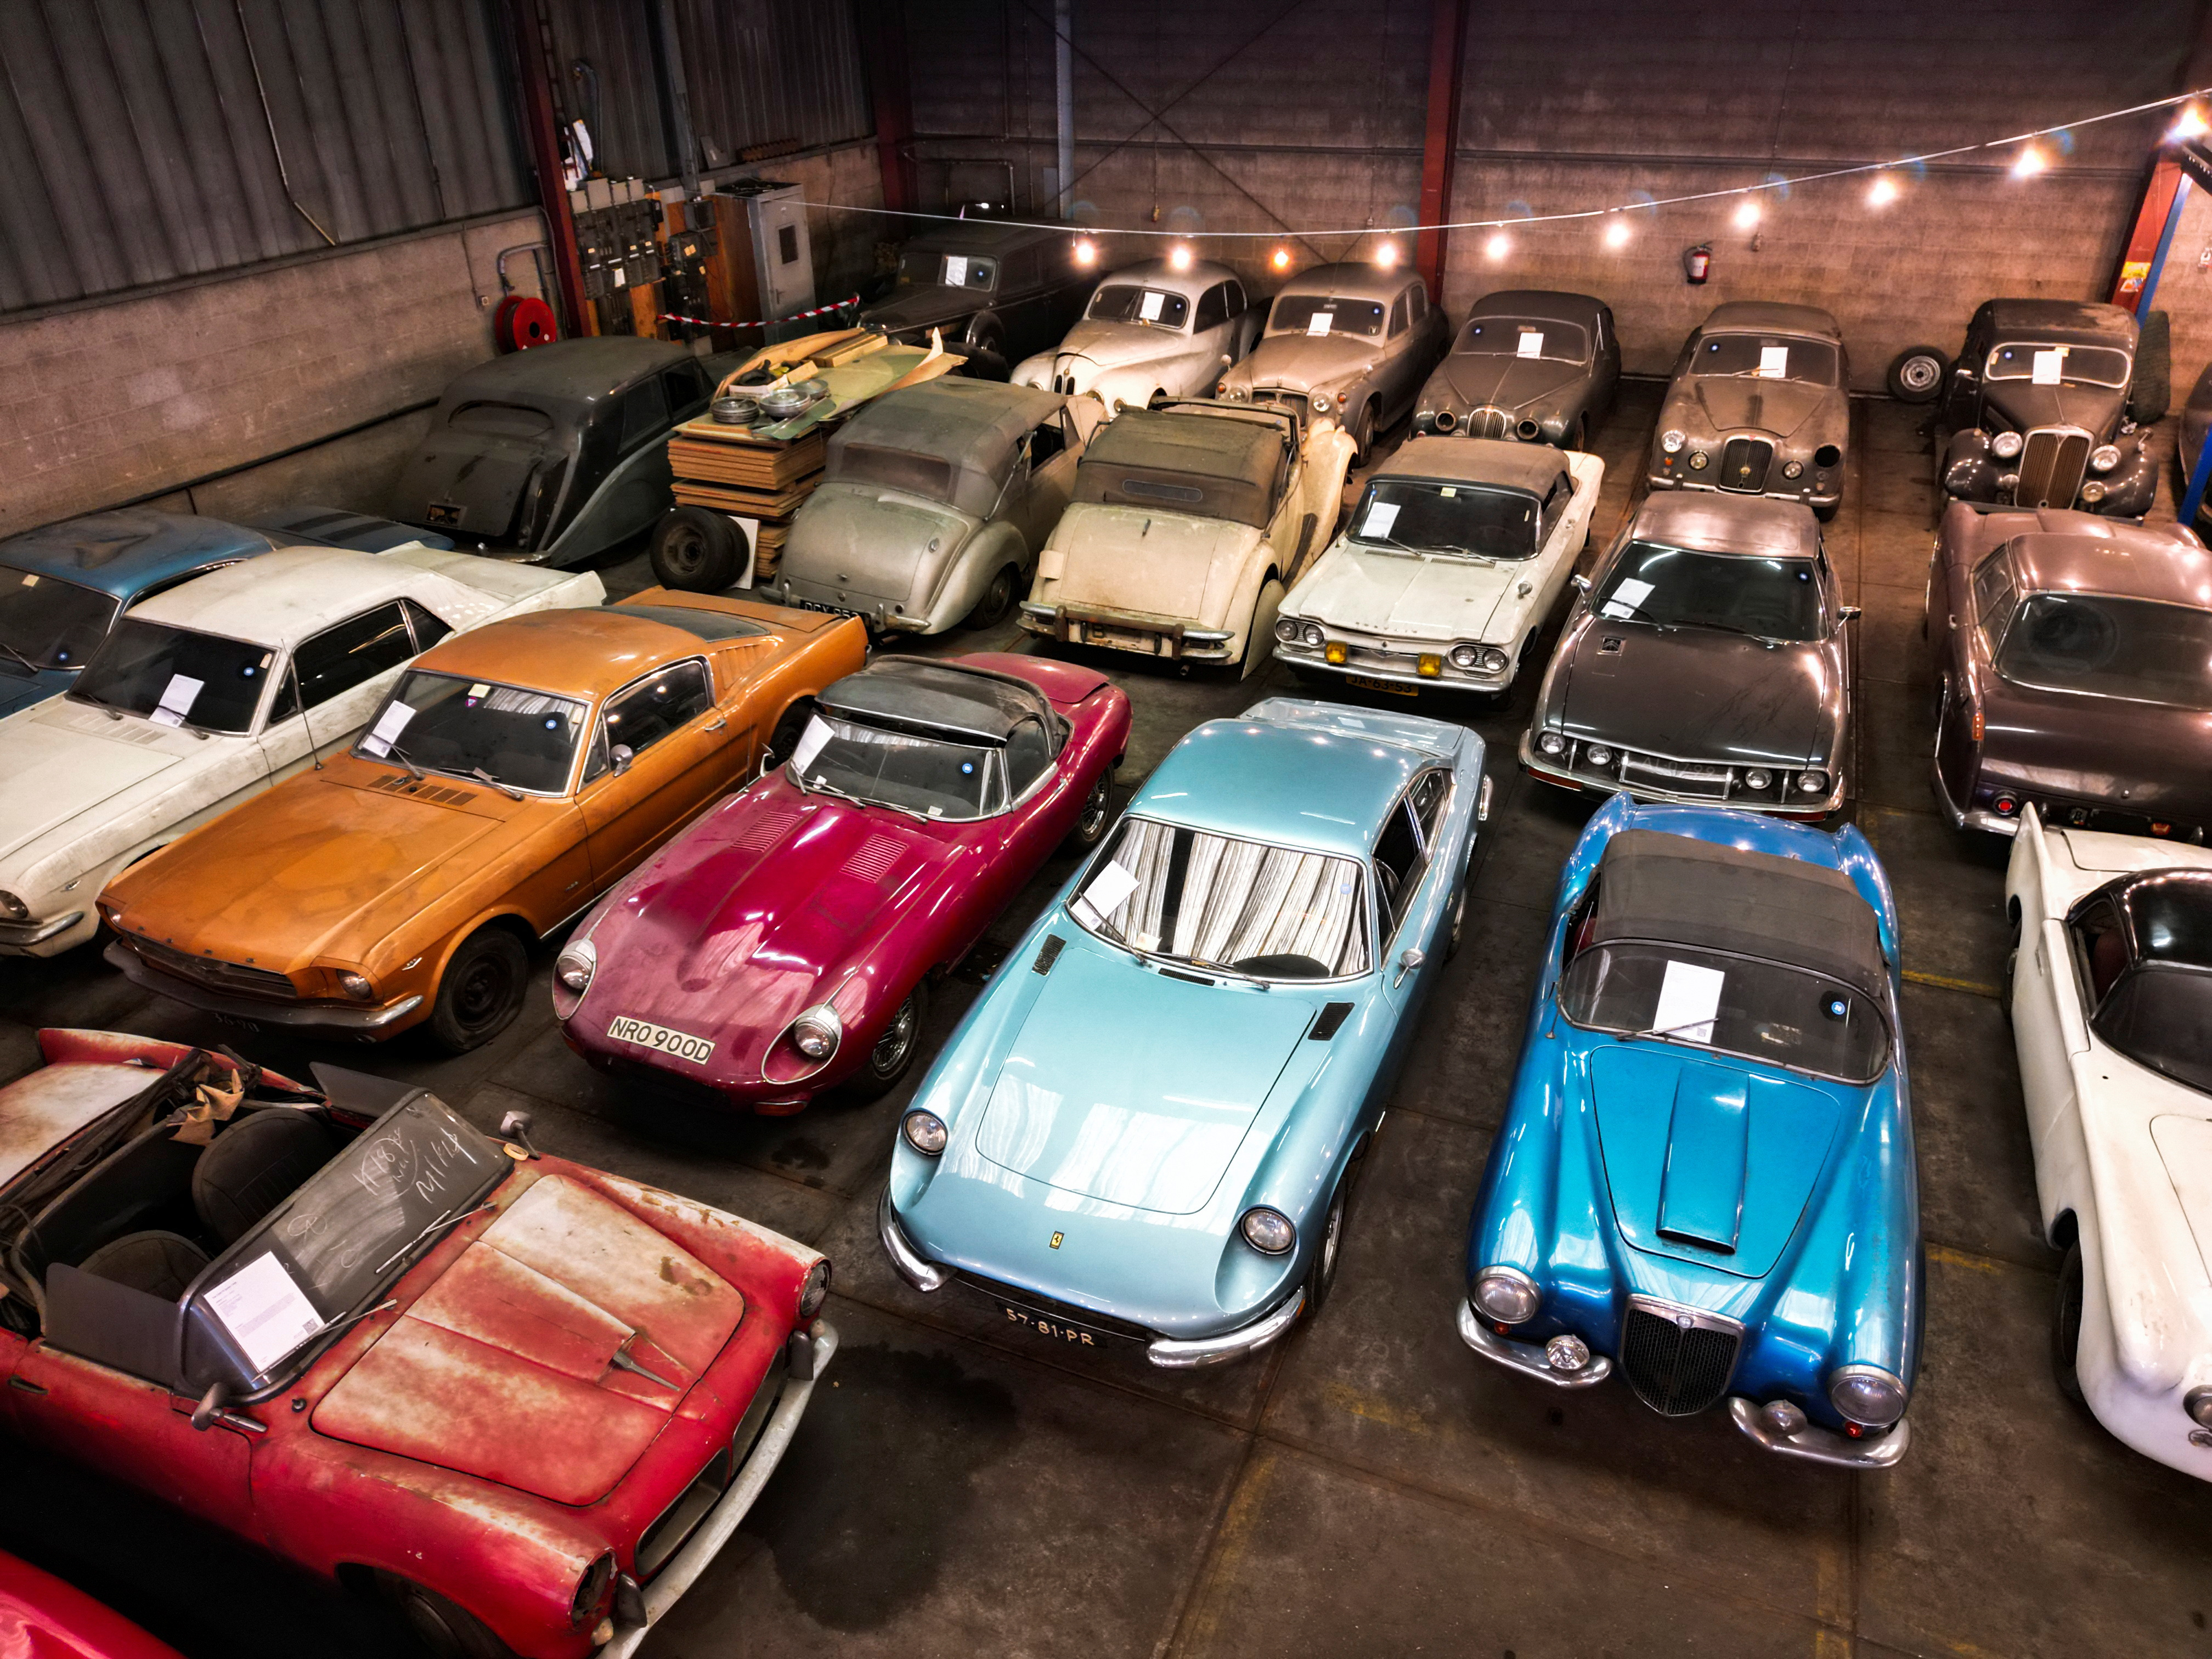 Cars belonging to the Palmen collection are displayed in a warehouse in Dordrecht